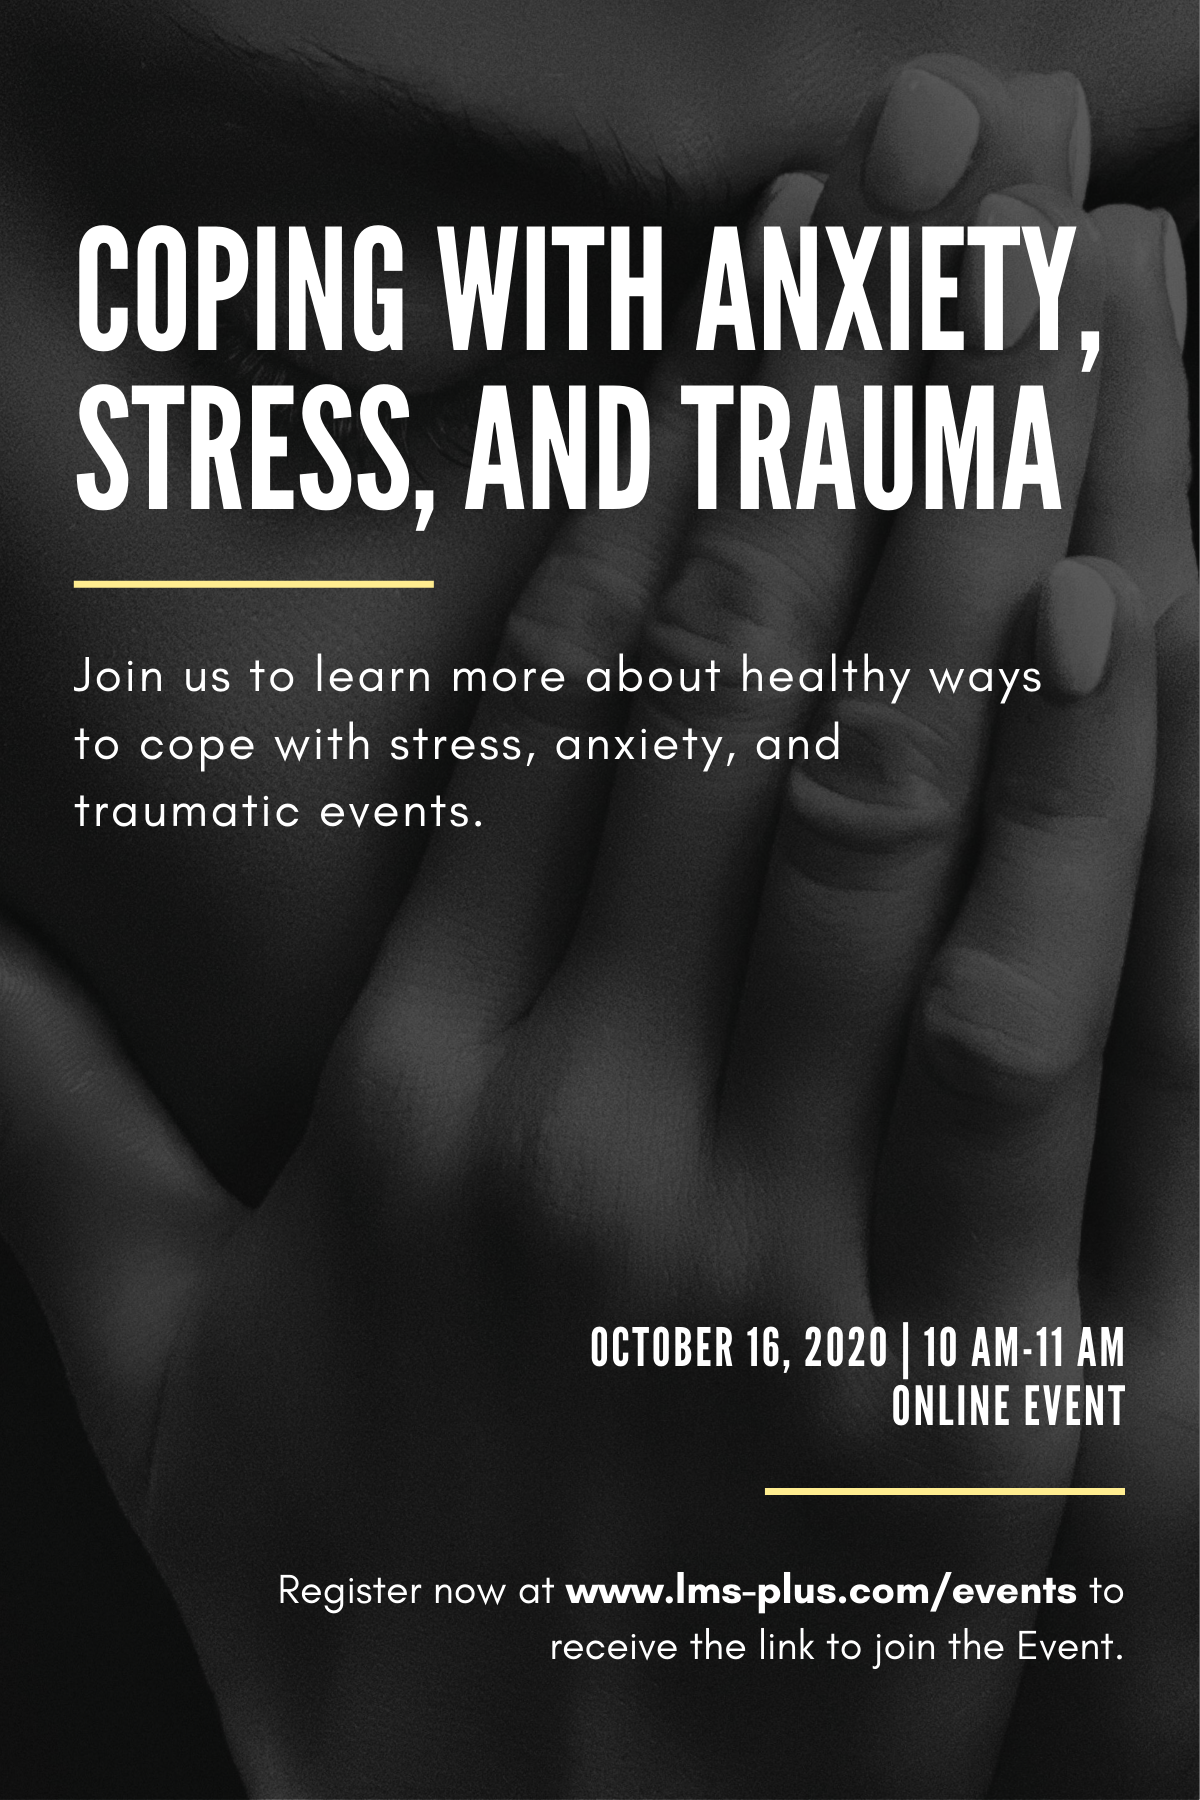 Coping with Anxiety, Stress, and Trauma, Marion, Florida, United States